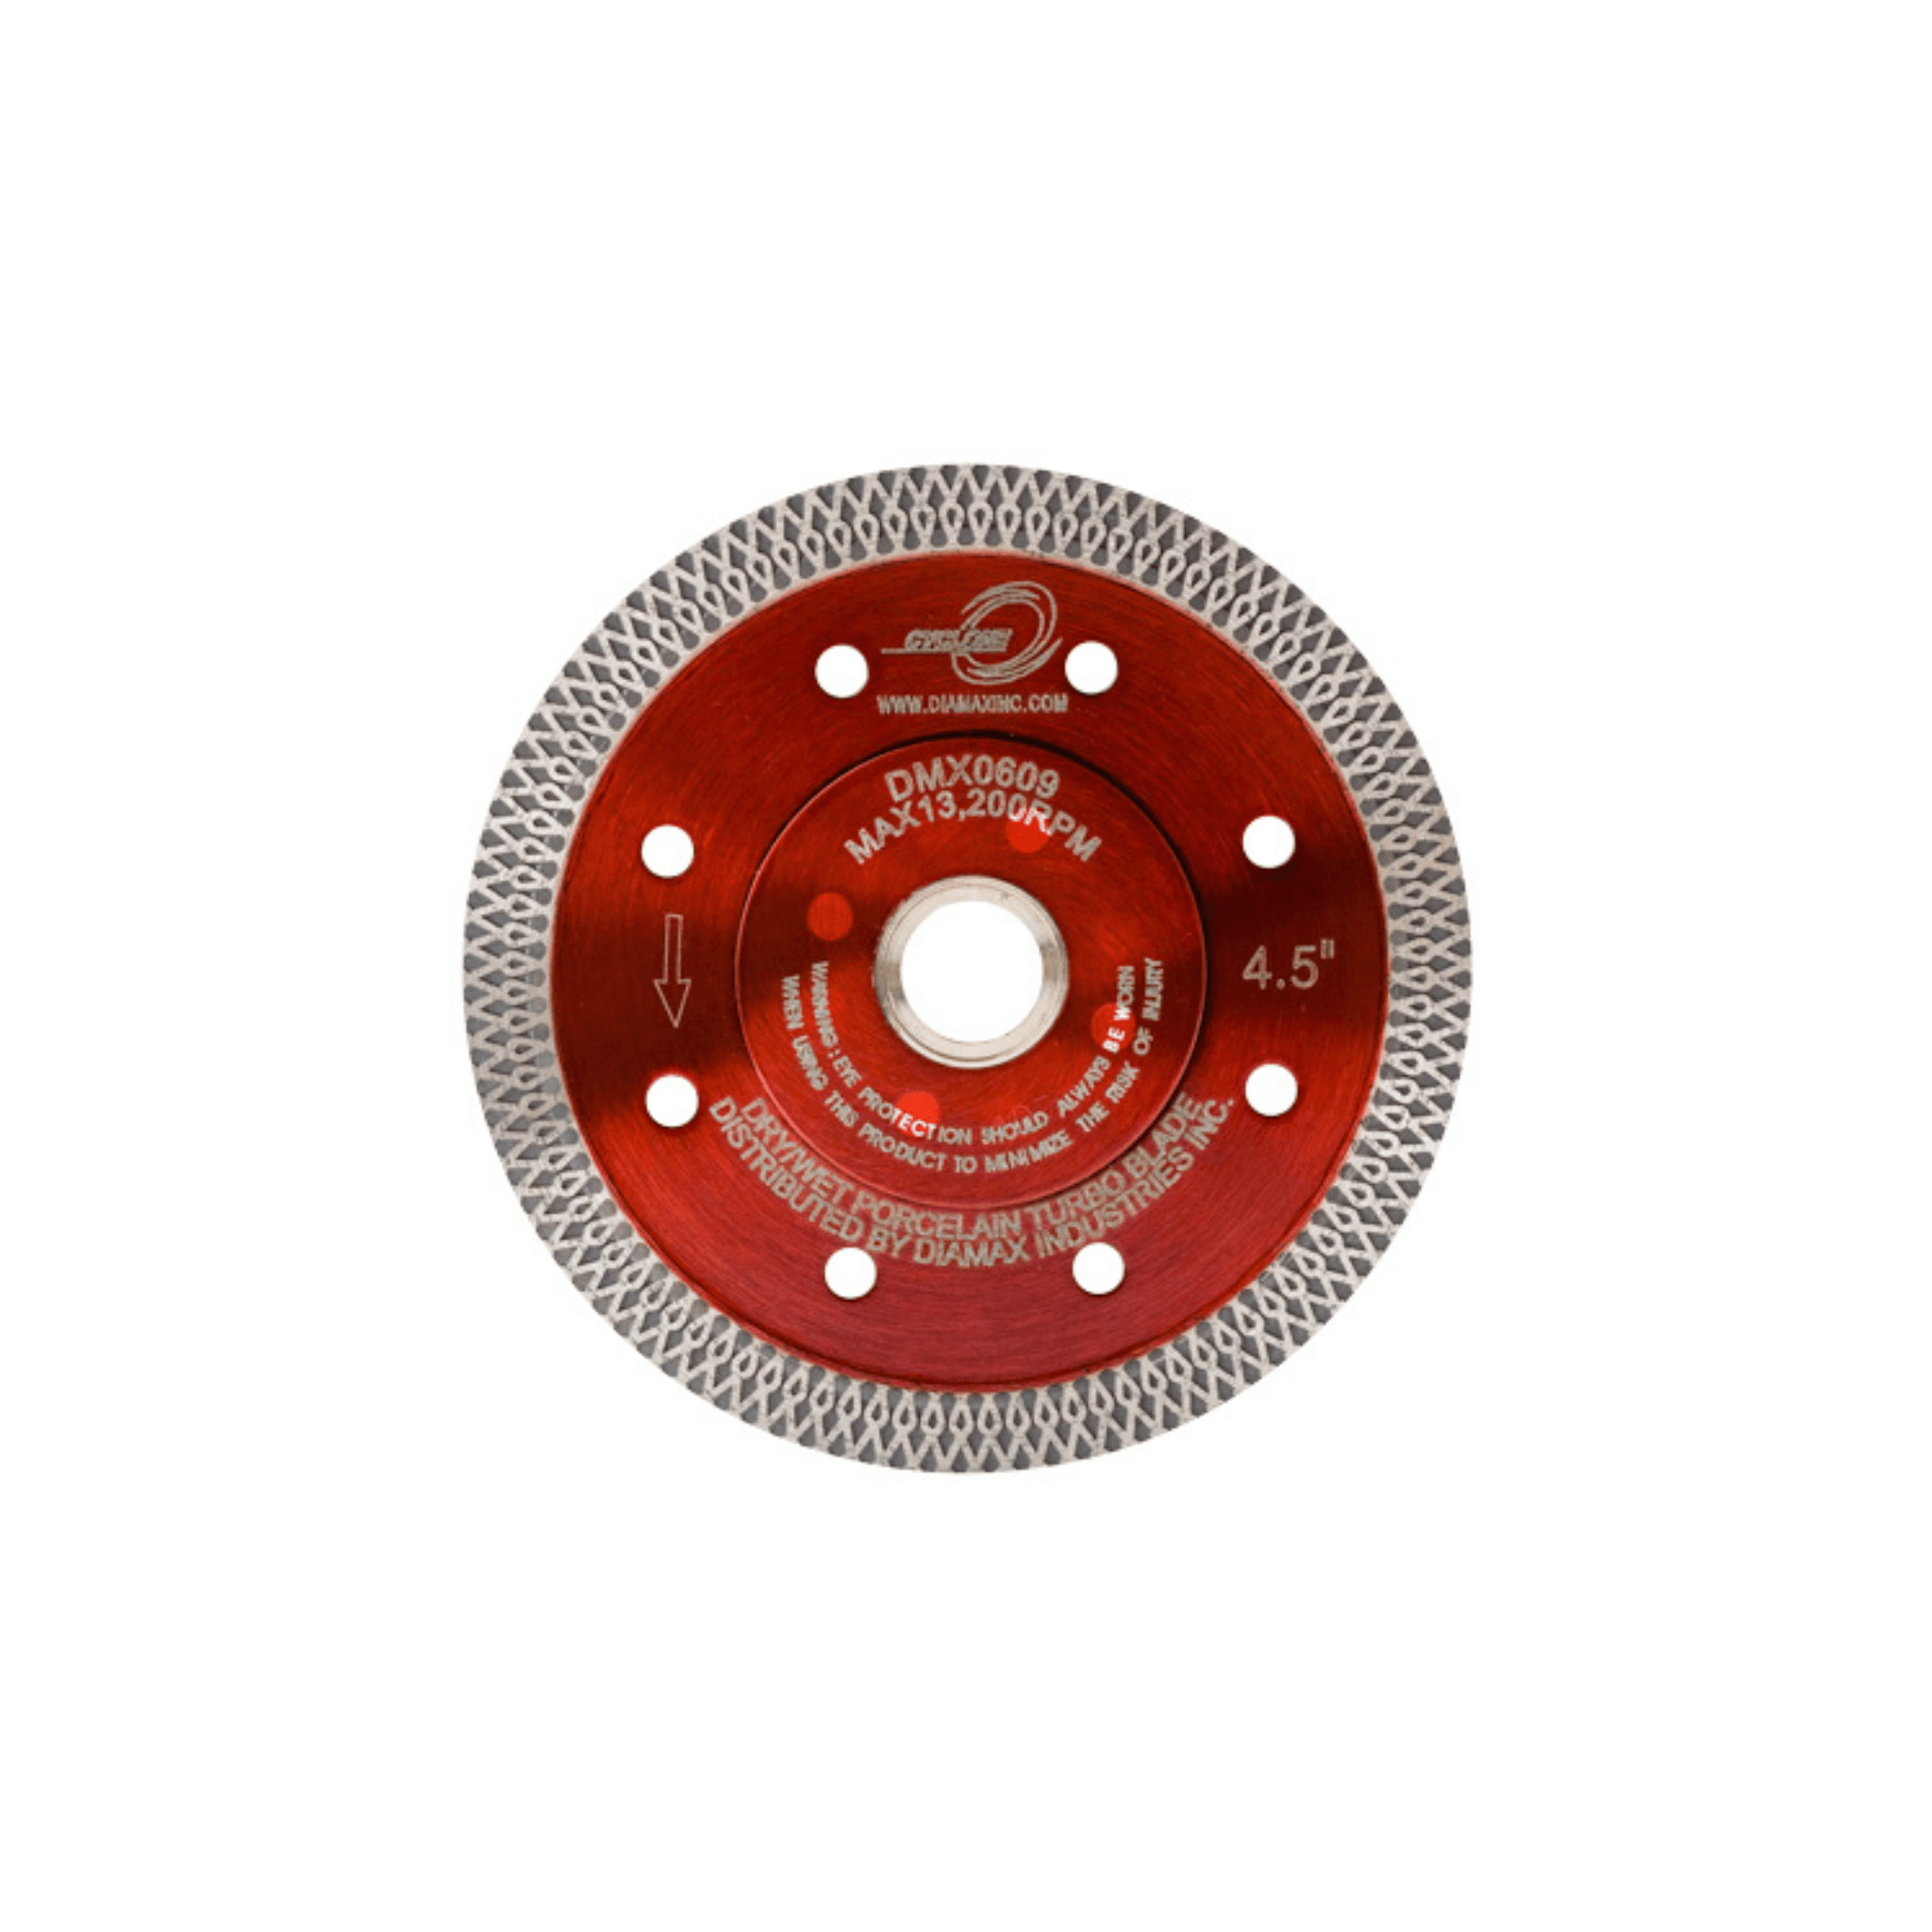 Cyclone Porcelain Turbo Blade 4.5" - Direct Stone Tool Supply, Inc